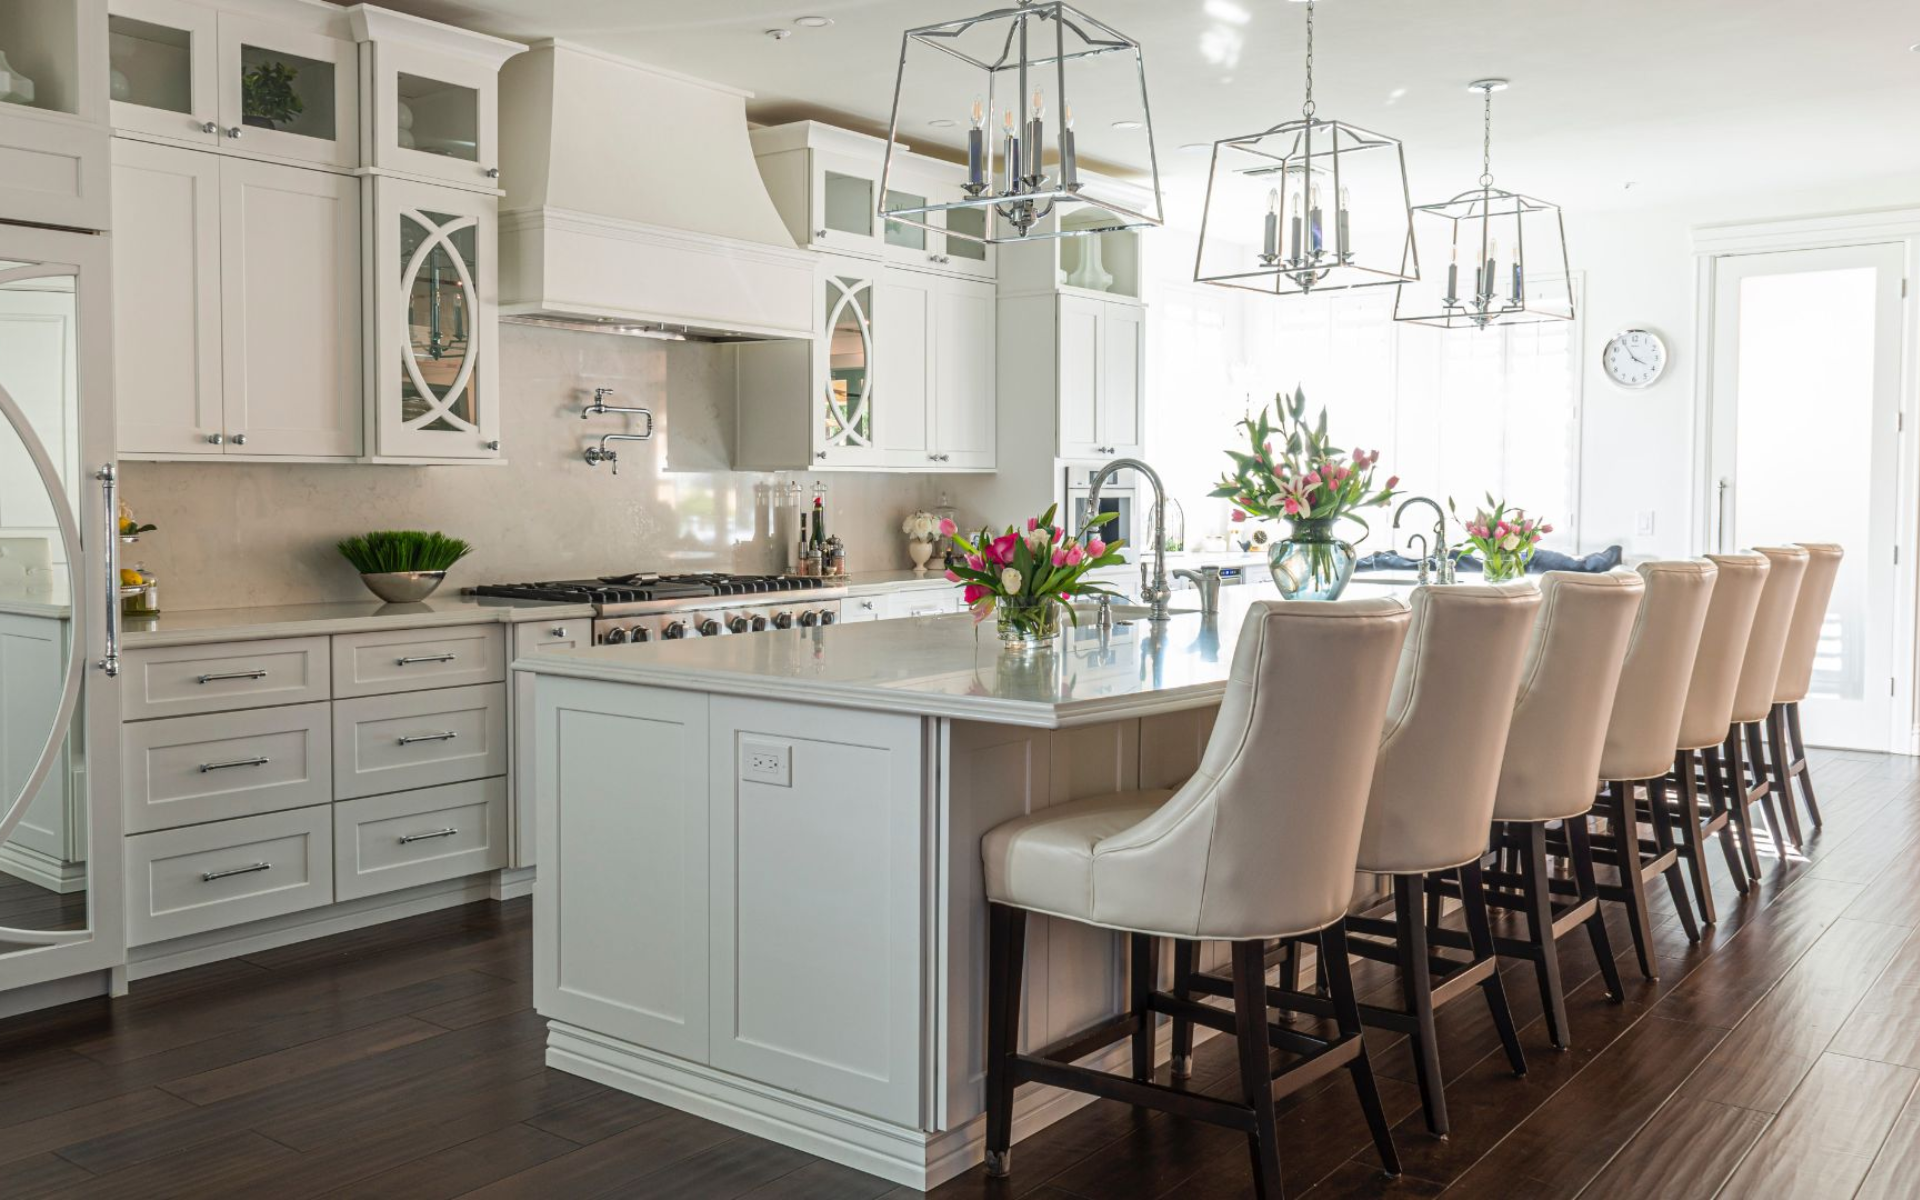 Farmhouse style kitchen with white shaker cabinets